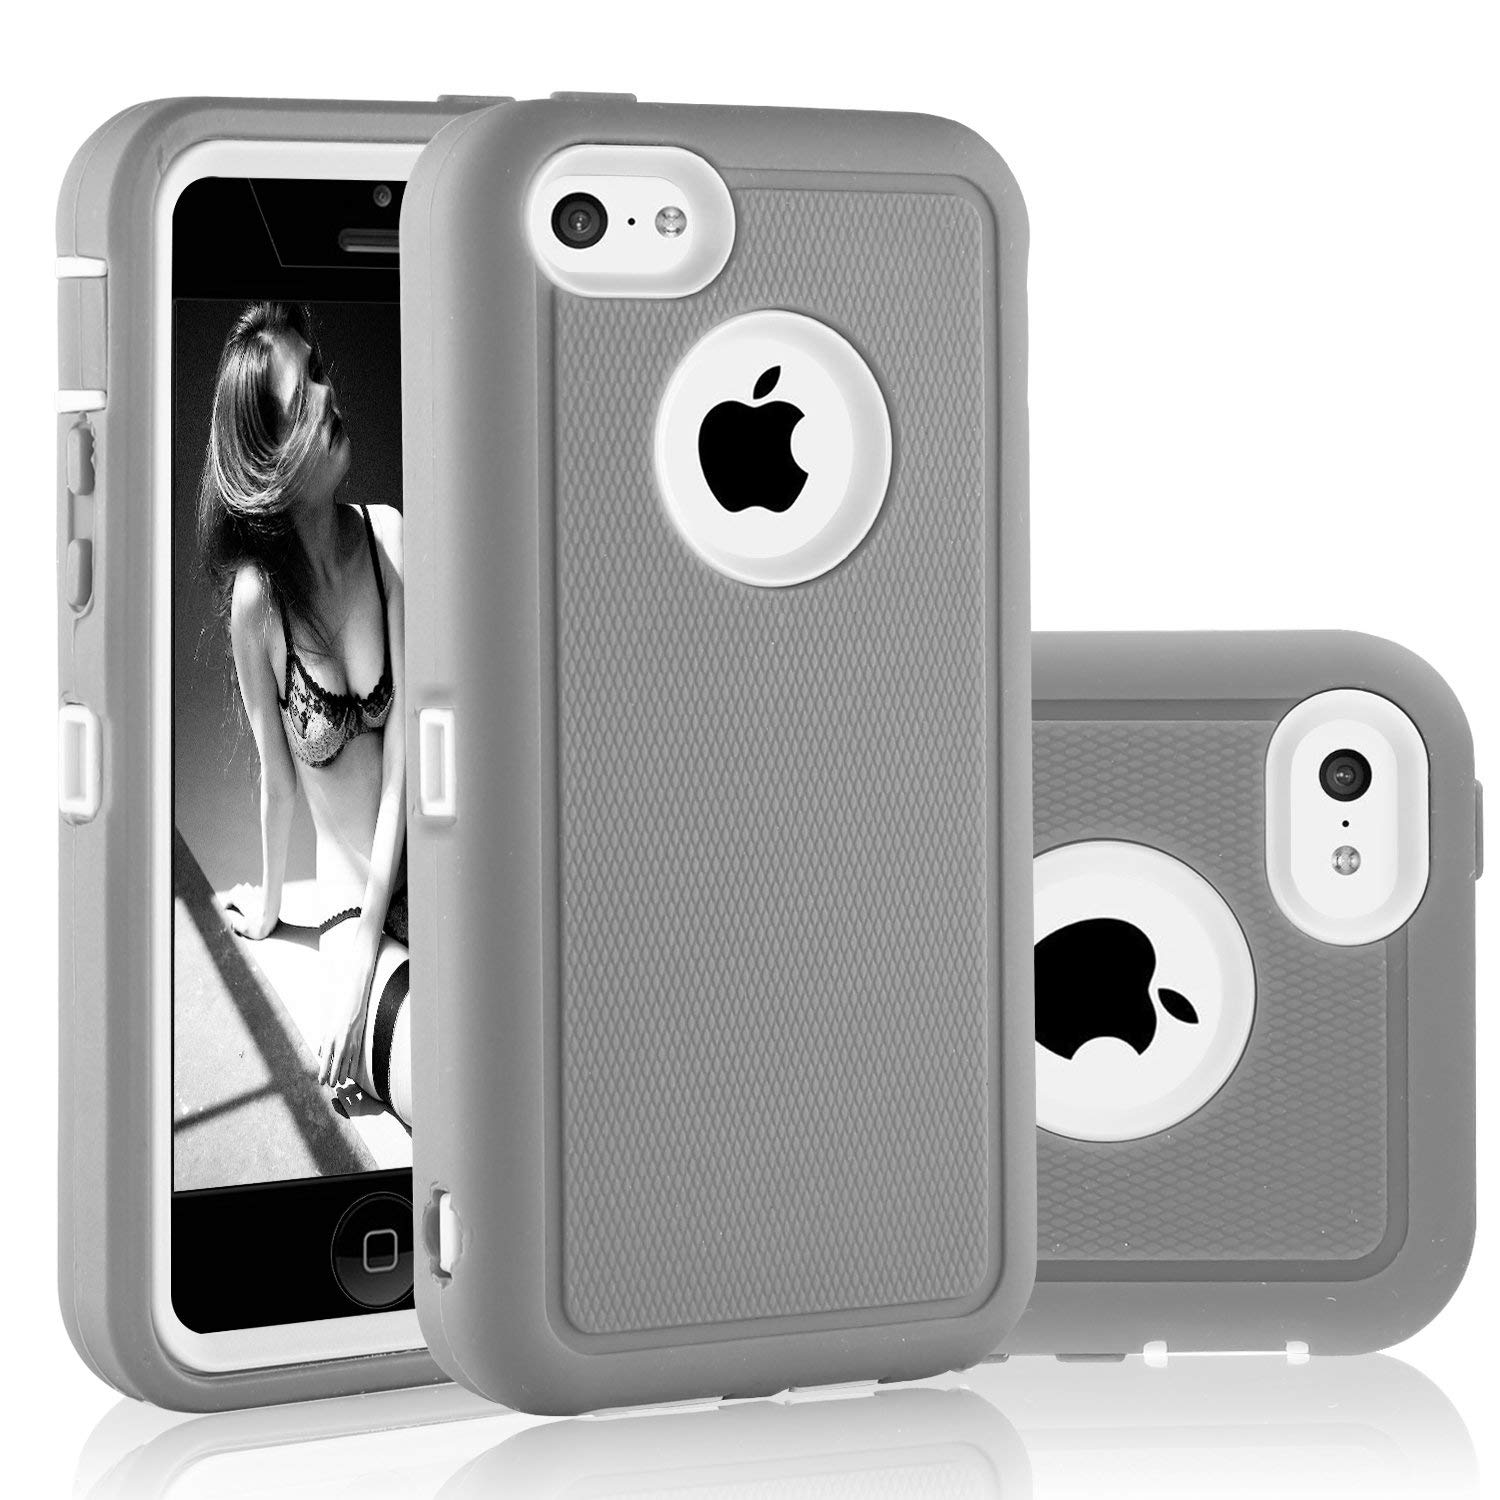 iPhone 5C Case, FOGEEK Dual Layer Anti Slip 360 Full Body Cover Case PC and TPU Shockproof Protective Compatible for Apple iPhone 5C ONLY(Grey/White)